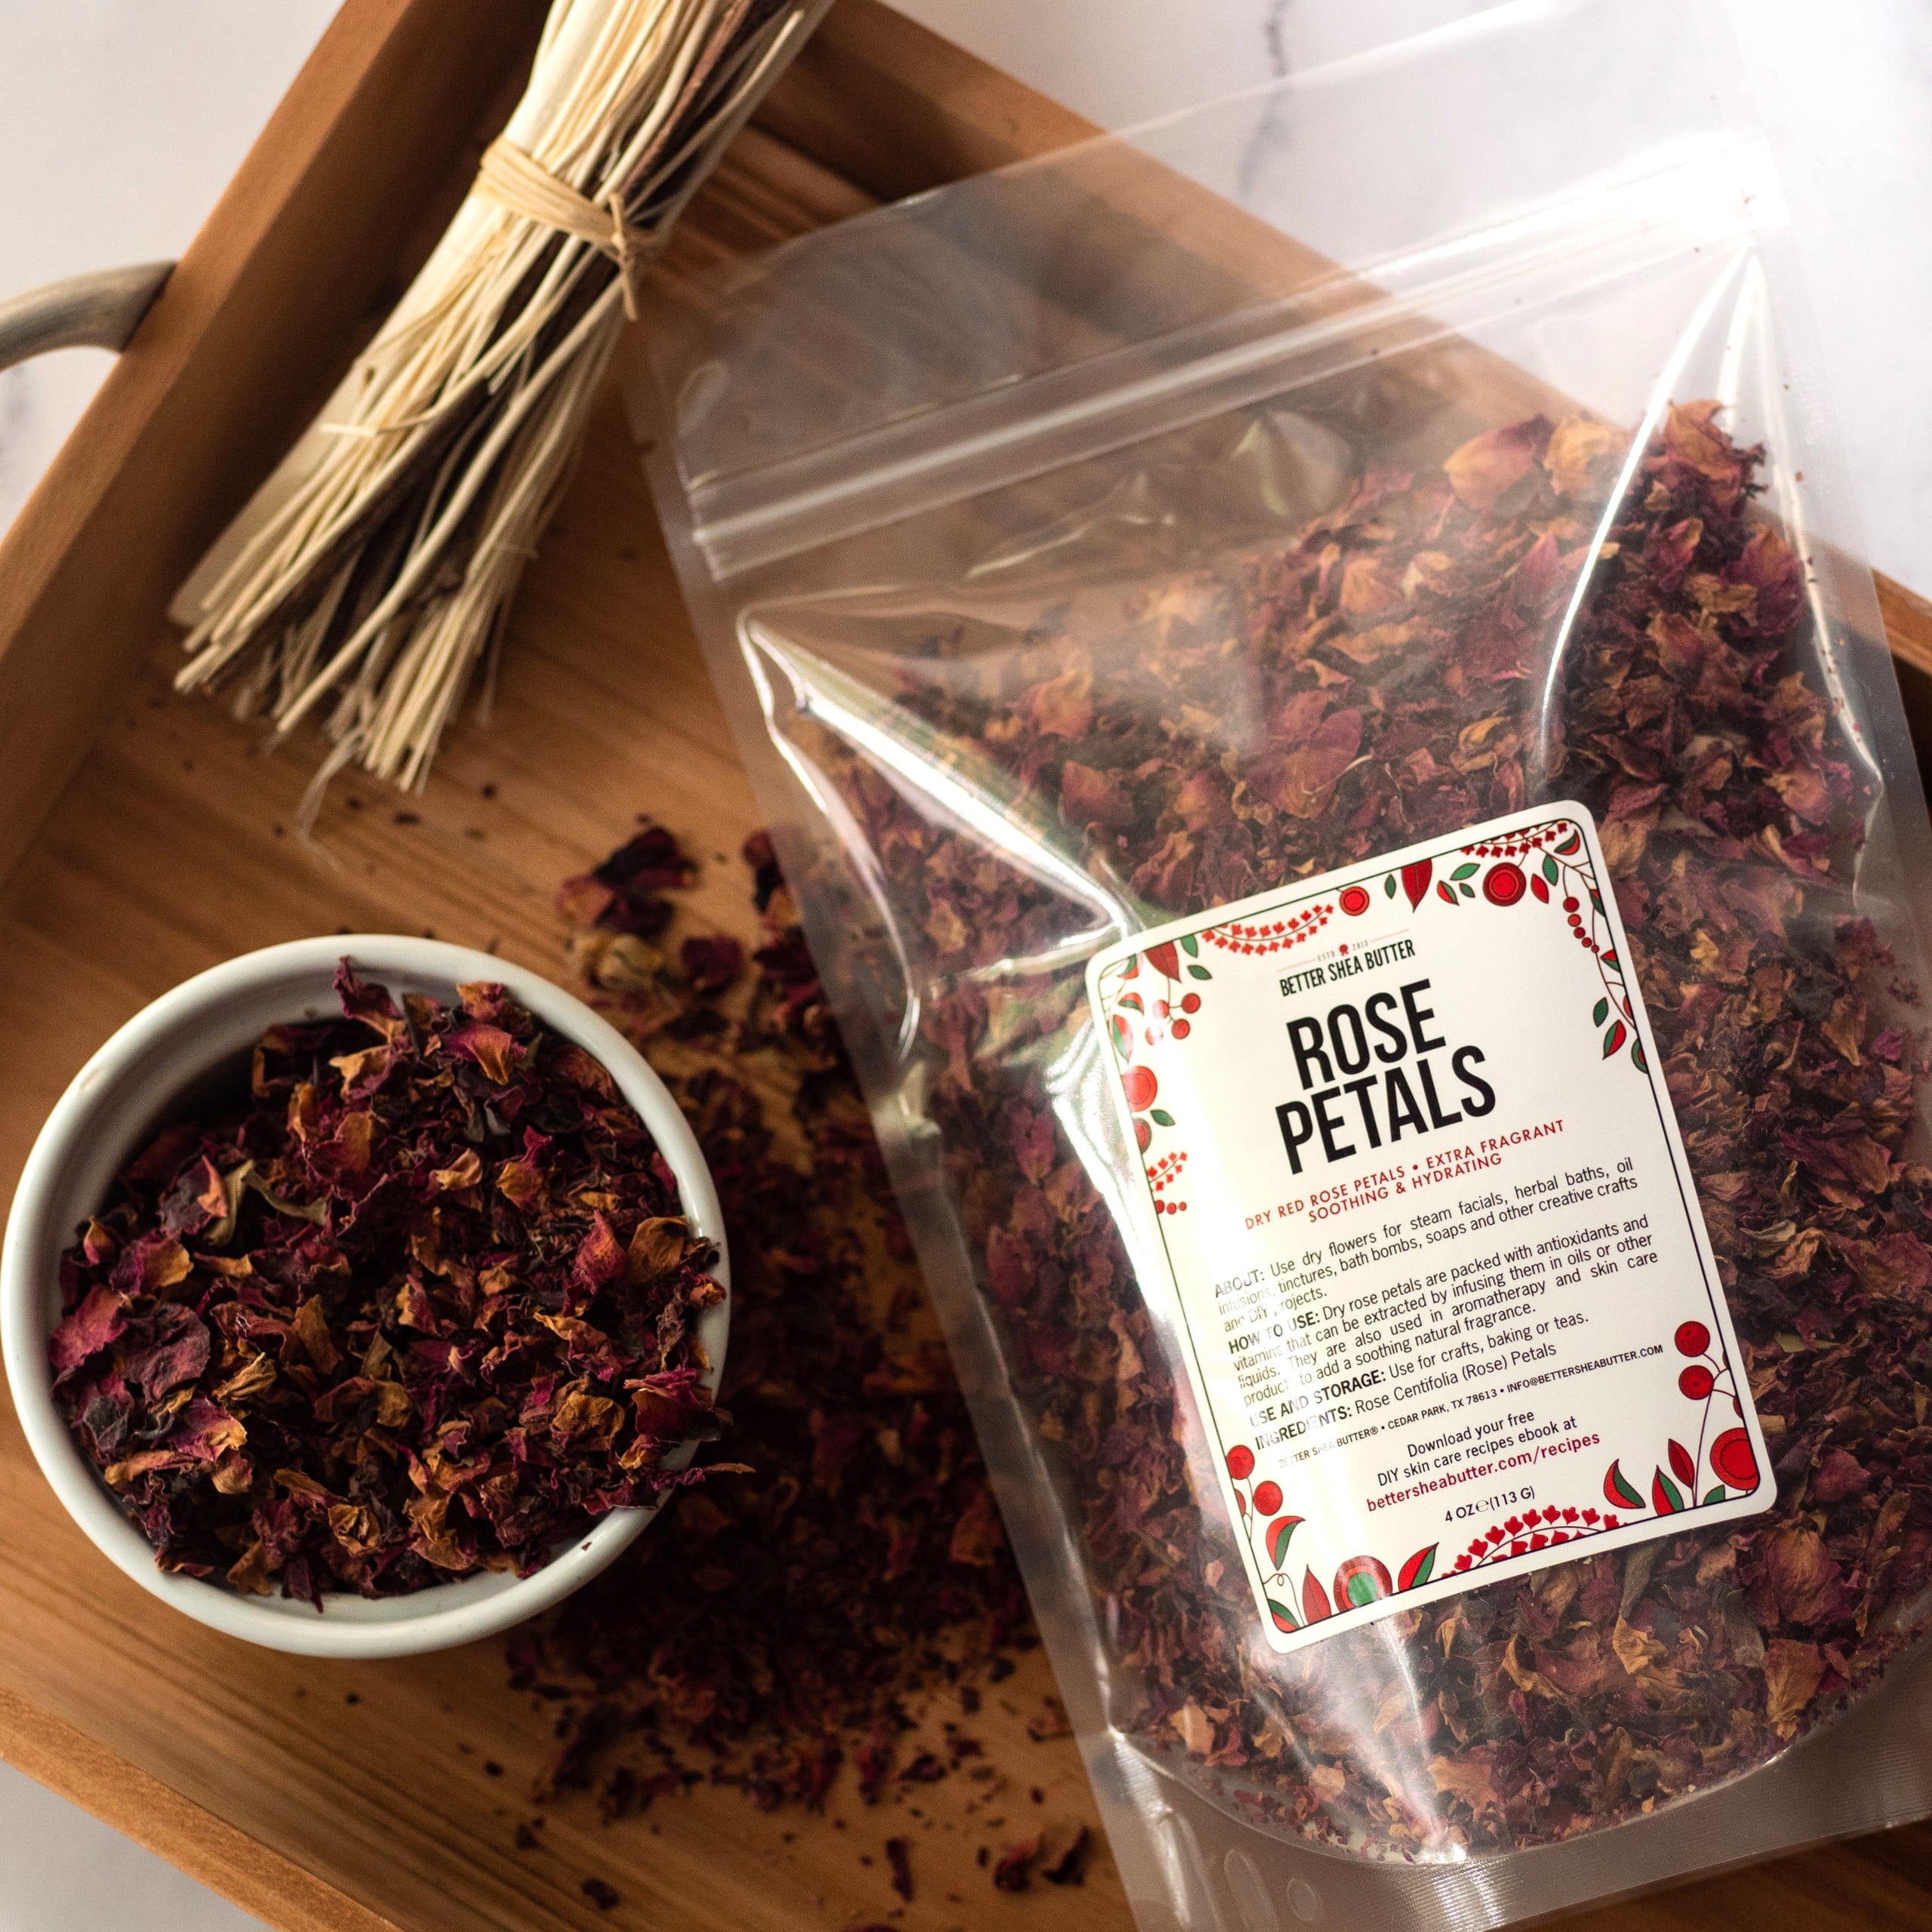 Dried Rose Petals - Dry Roses for Homemade Beauty Products